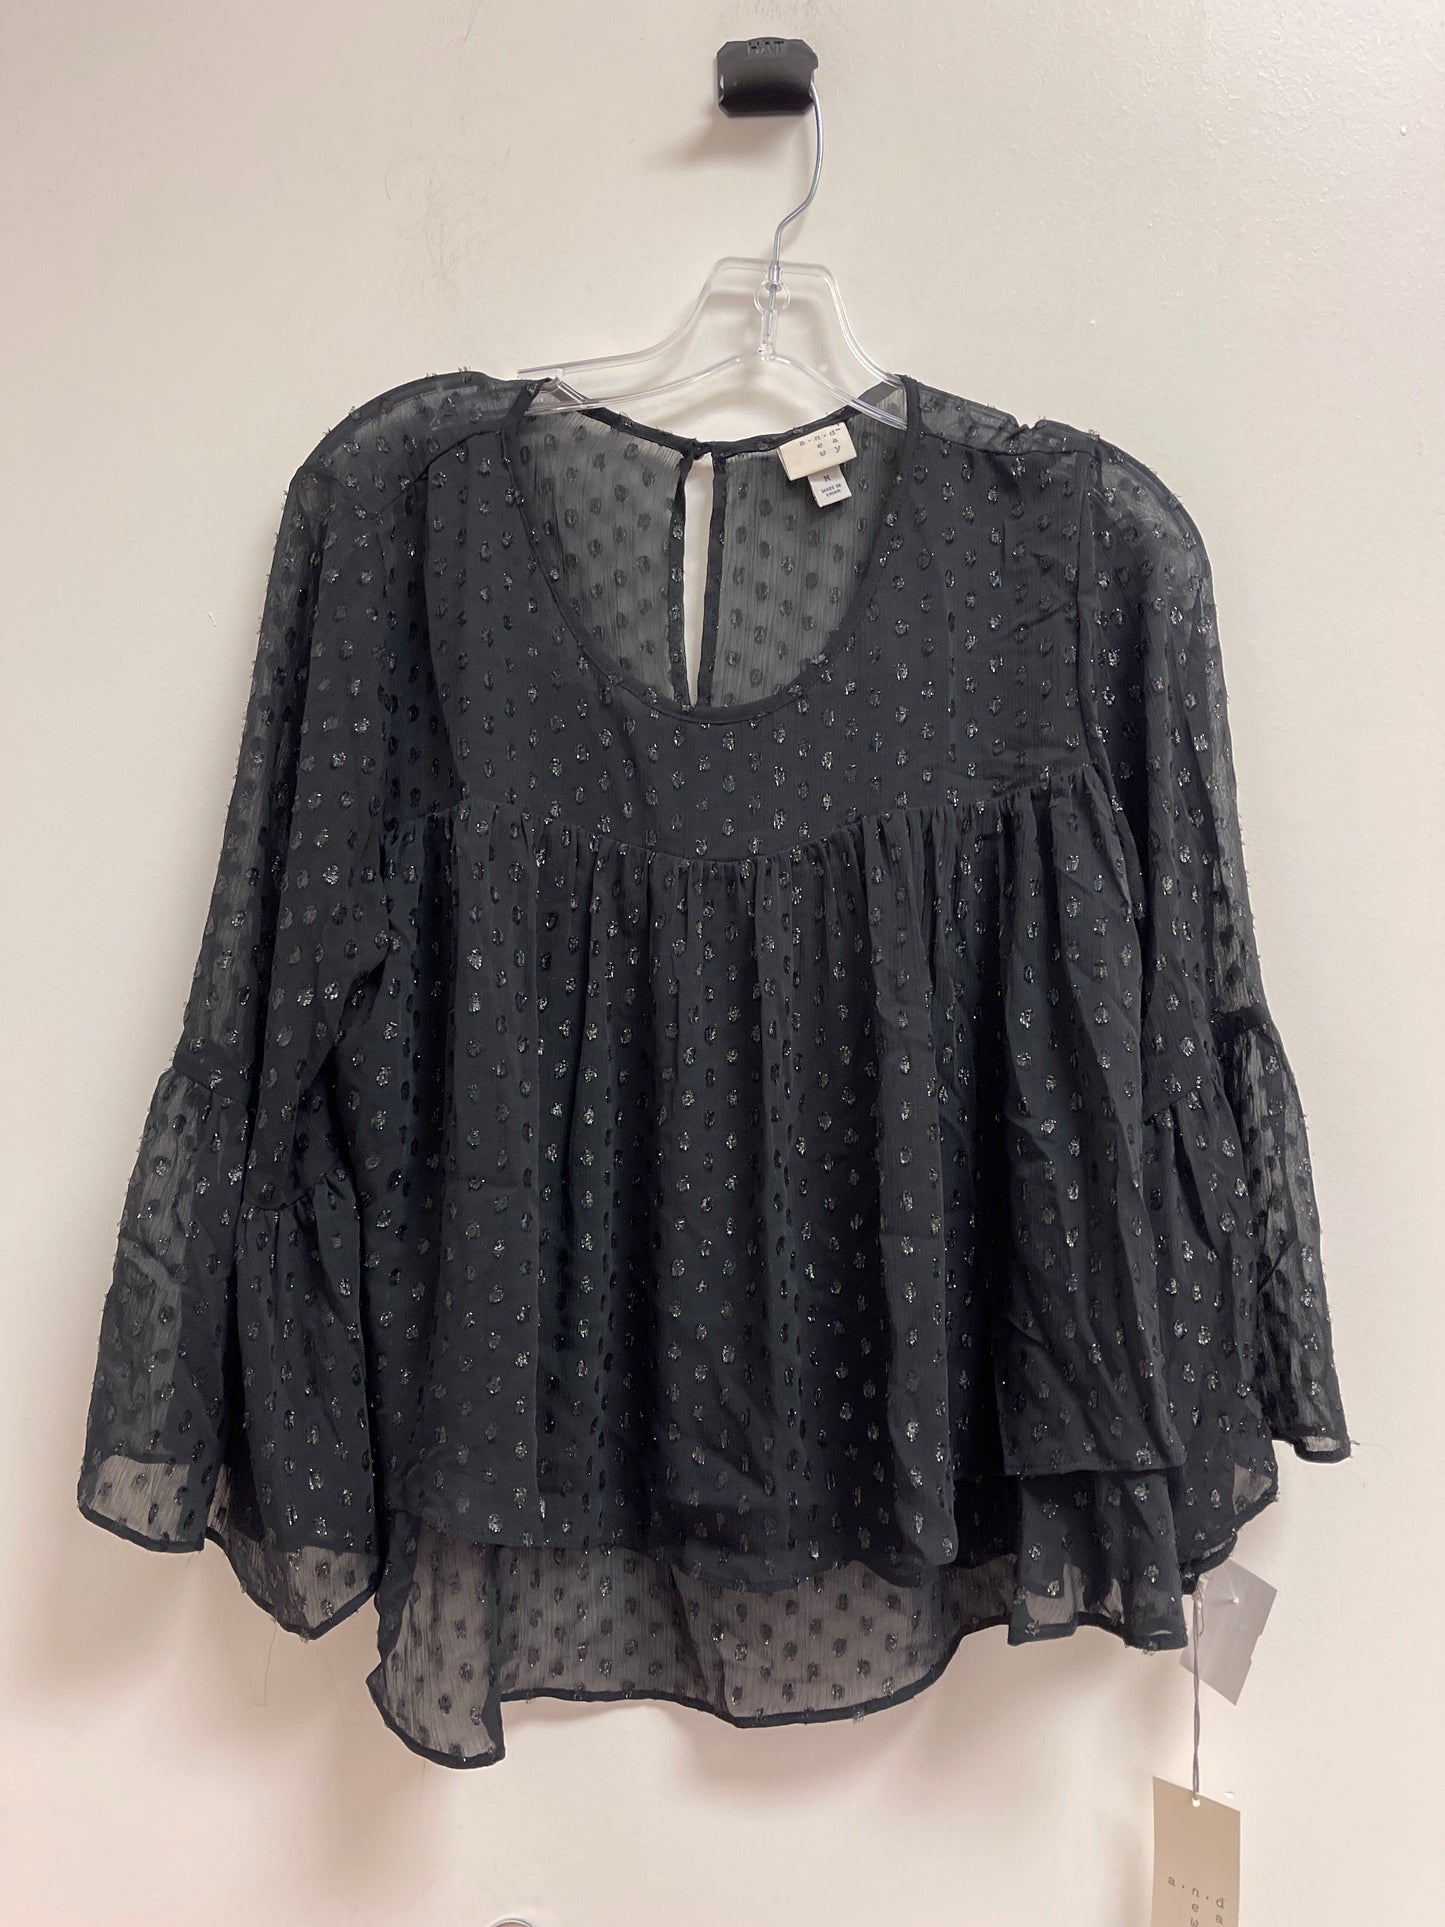 Black Top Long Sleeve A New Day, Size M